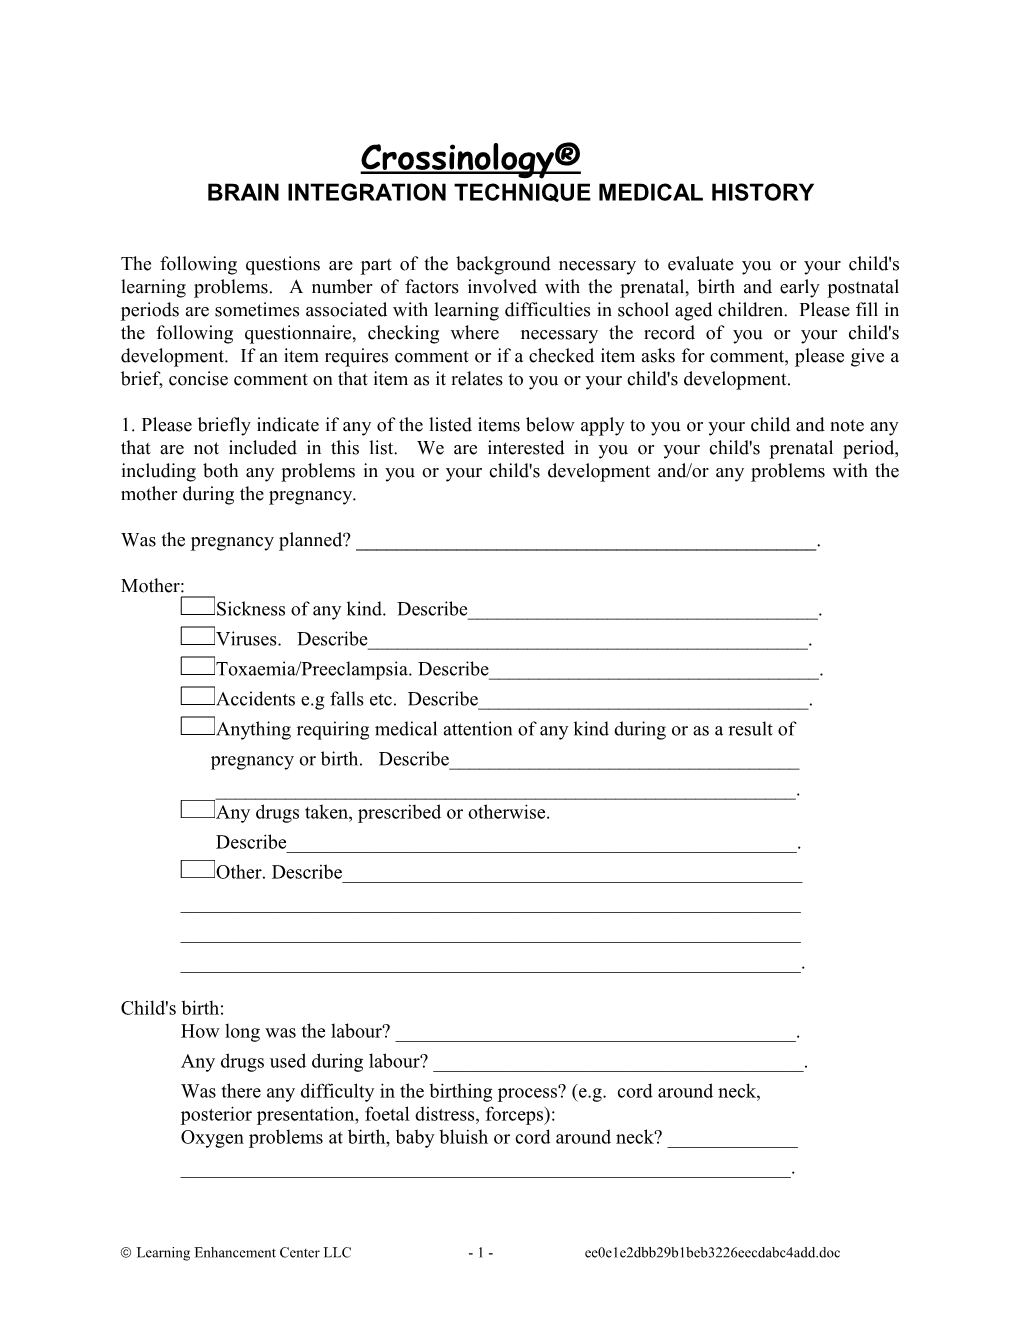 Medical History Form for Crossinology BIT